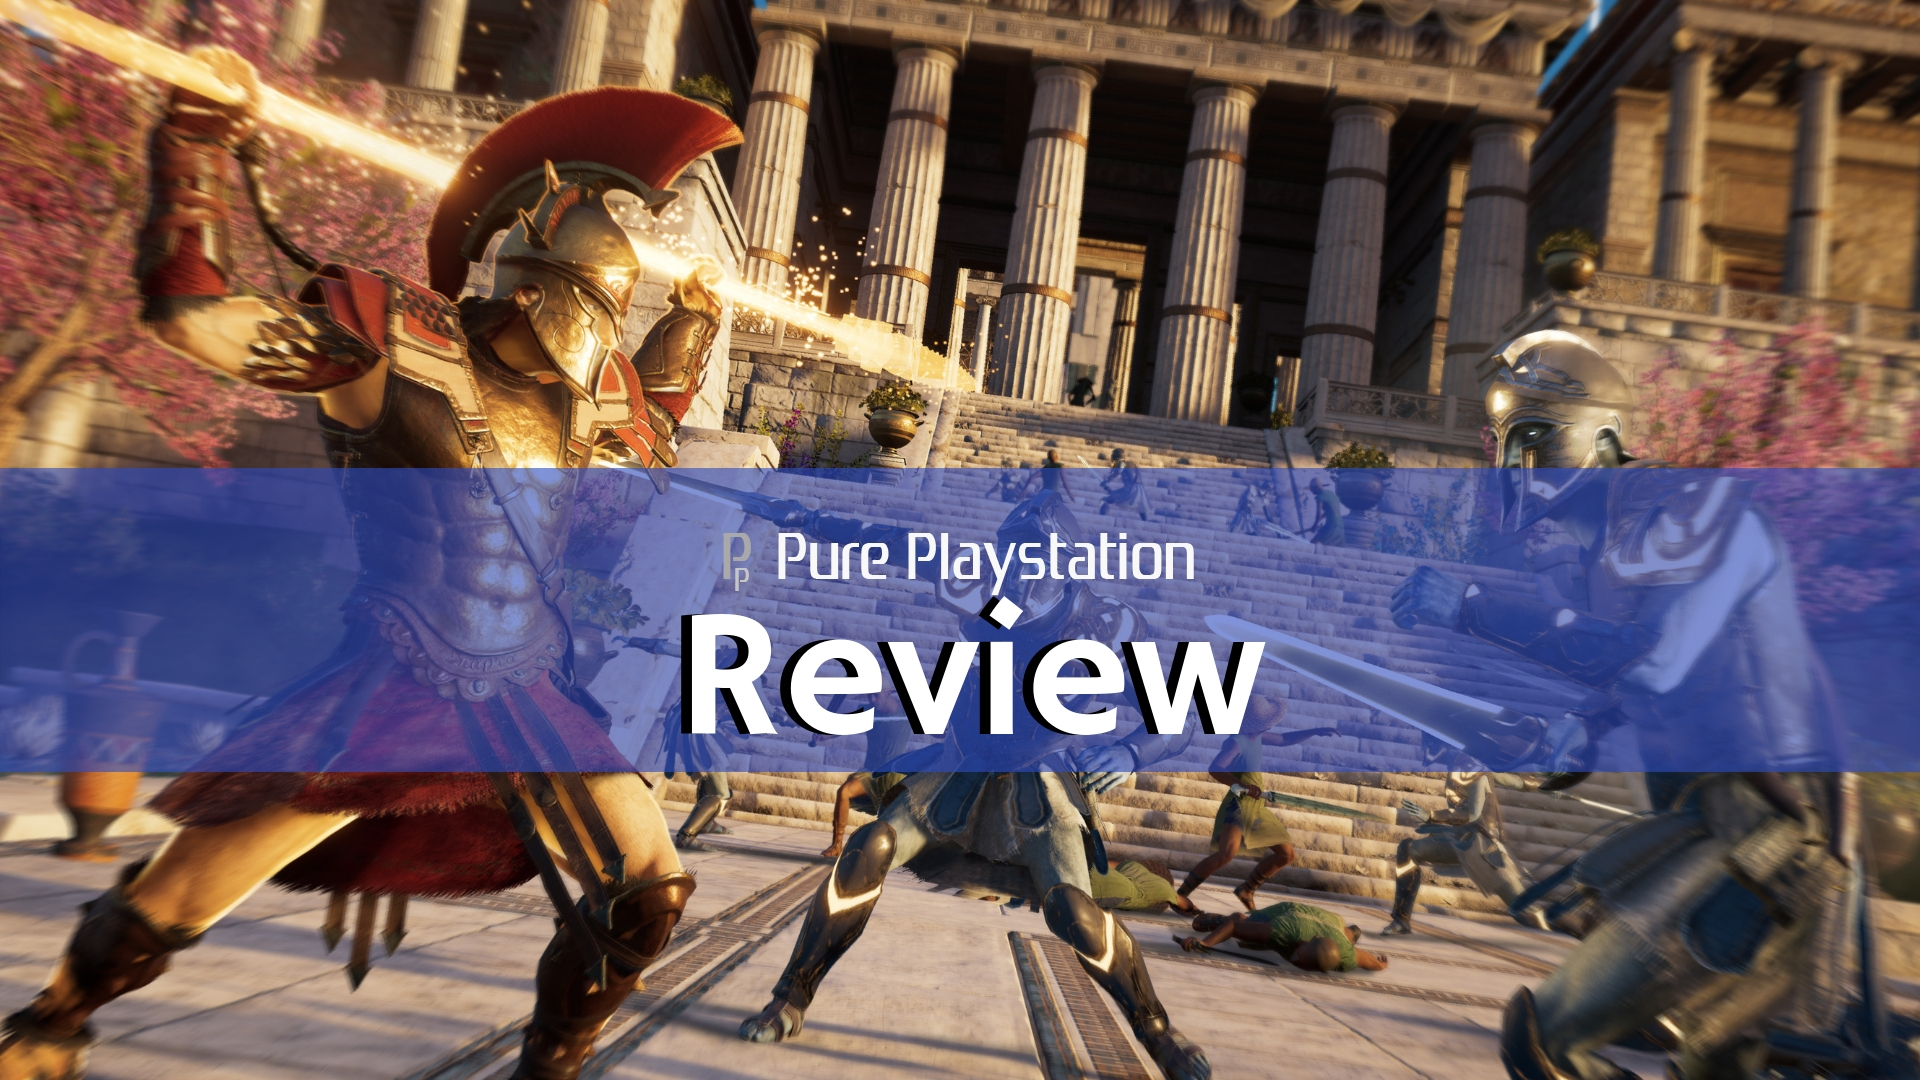 Review: Assassin's Creed Odyssey - The Fate of Atlantis: Fields of Elysium - PS4